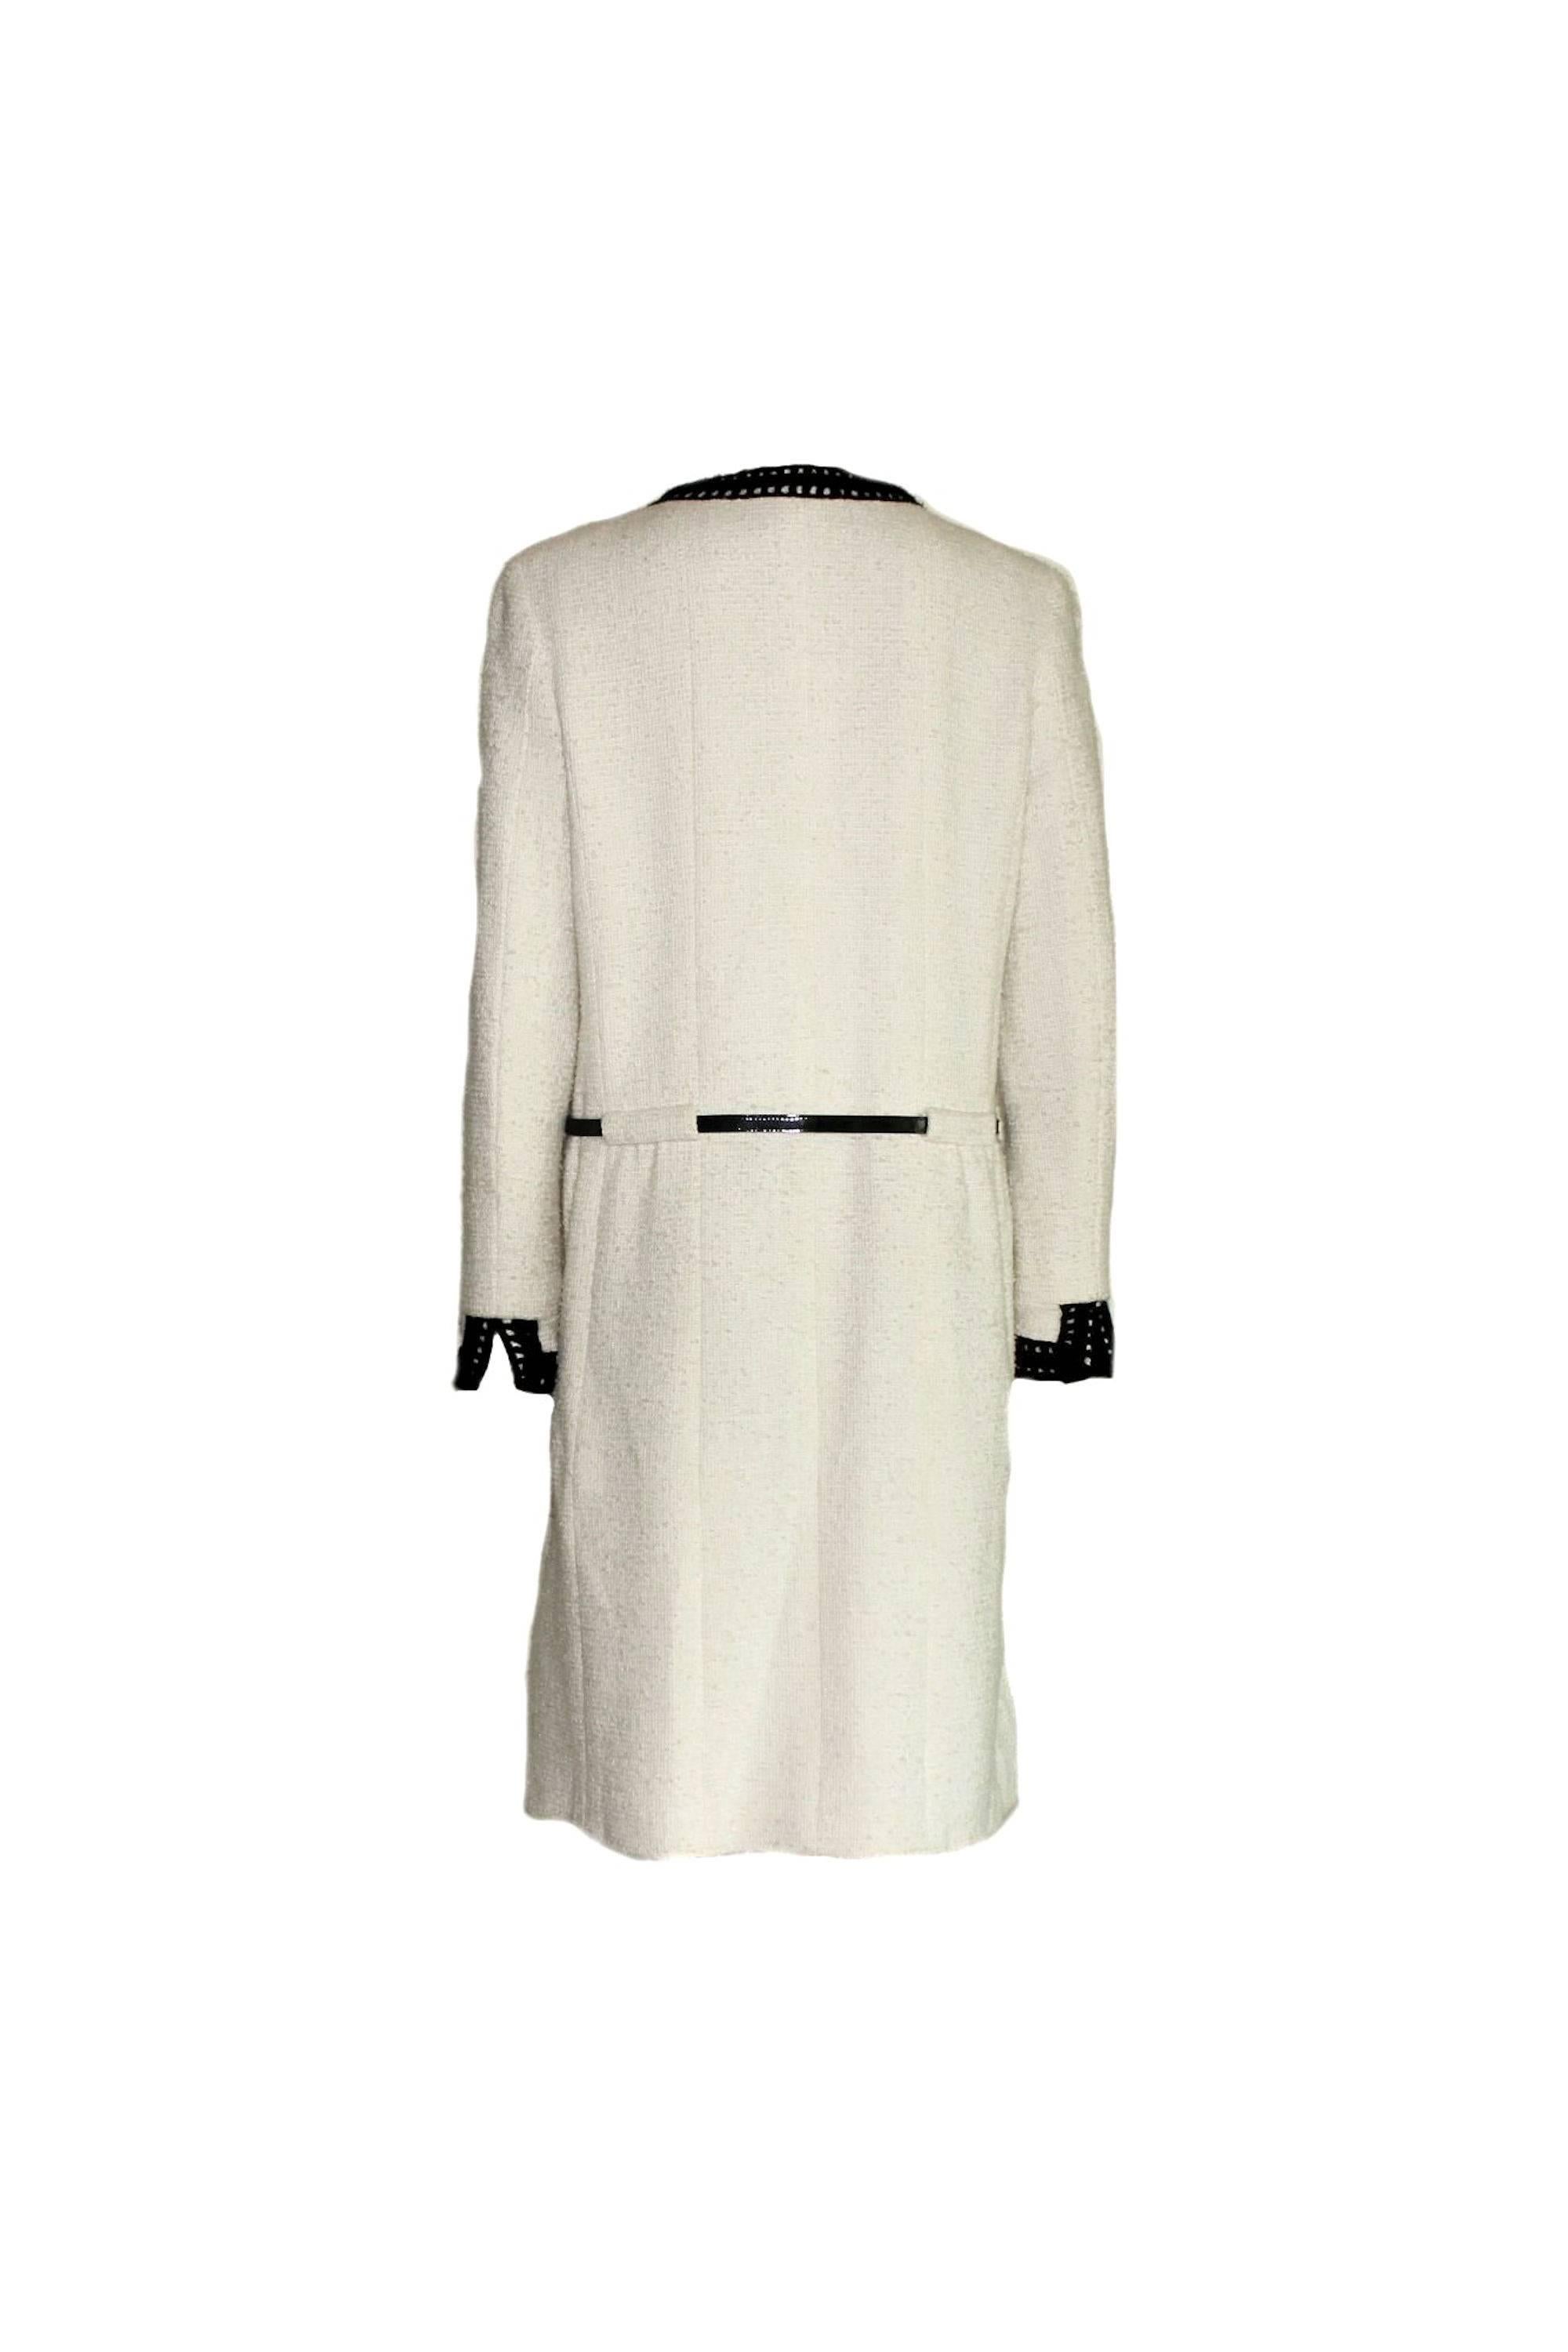 AMAZING & RARE

CHANEL SIGNATURE WHITE AND BLACK TWEED COAT

FROM CHANEL RUNWAY SHOW COLLECTION 

DESIGNED BY KARL LAGERFELD

A TRUE CHANEL PIECE THAT SHOULD BE IN EVERY WOMAN'S WARDROBE

DETAILS:
Beautiful CHANEL tweed coat designed by Karl